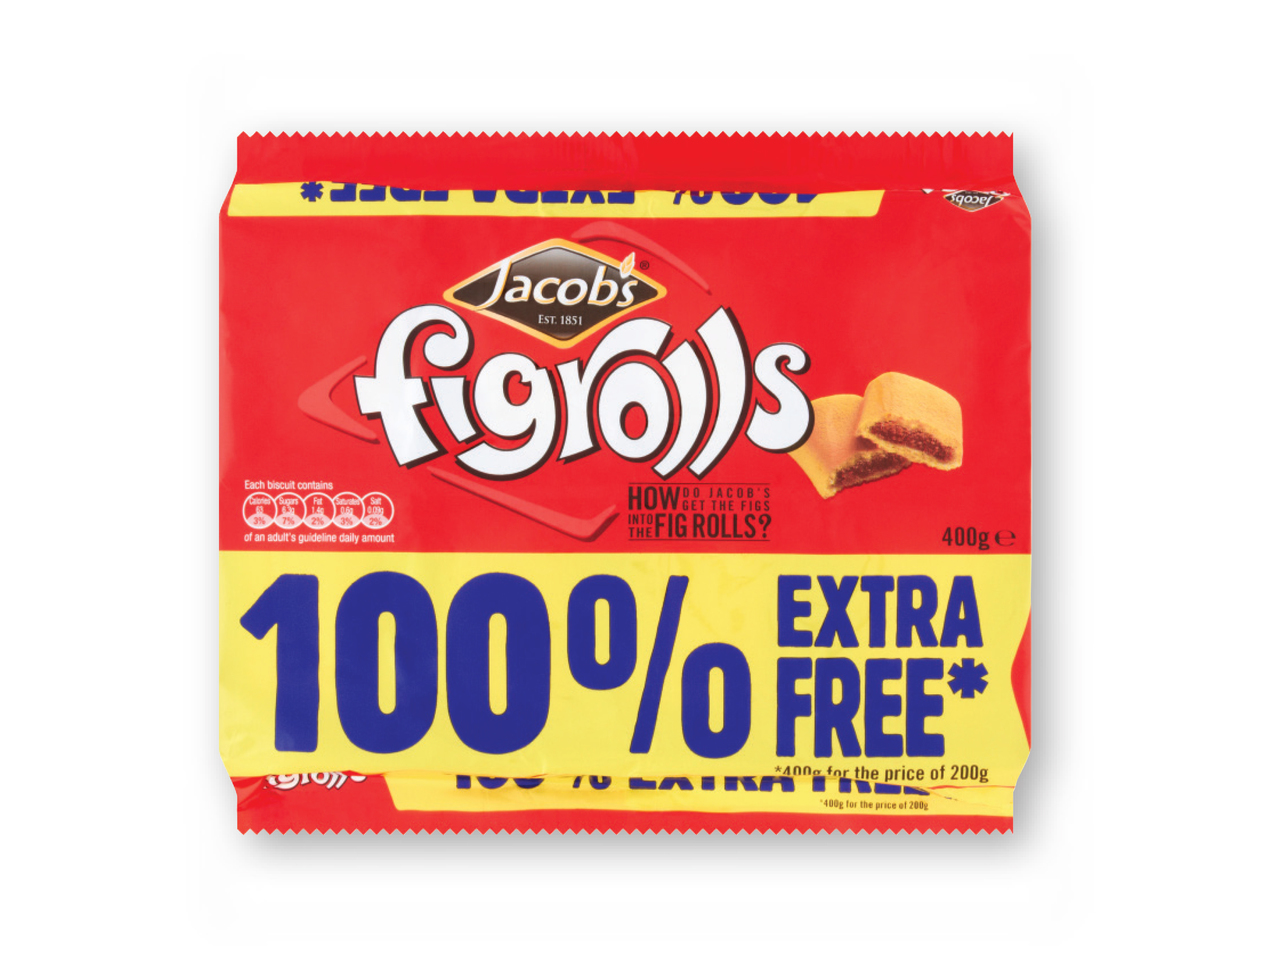 Jacobs Fig Rolls with 100% Extra Free